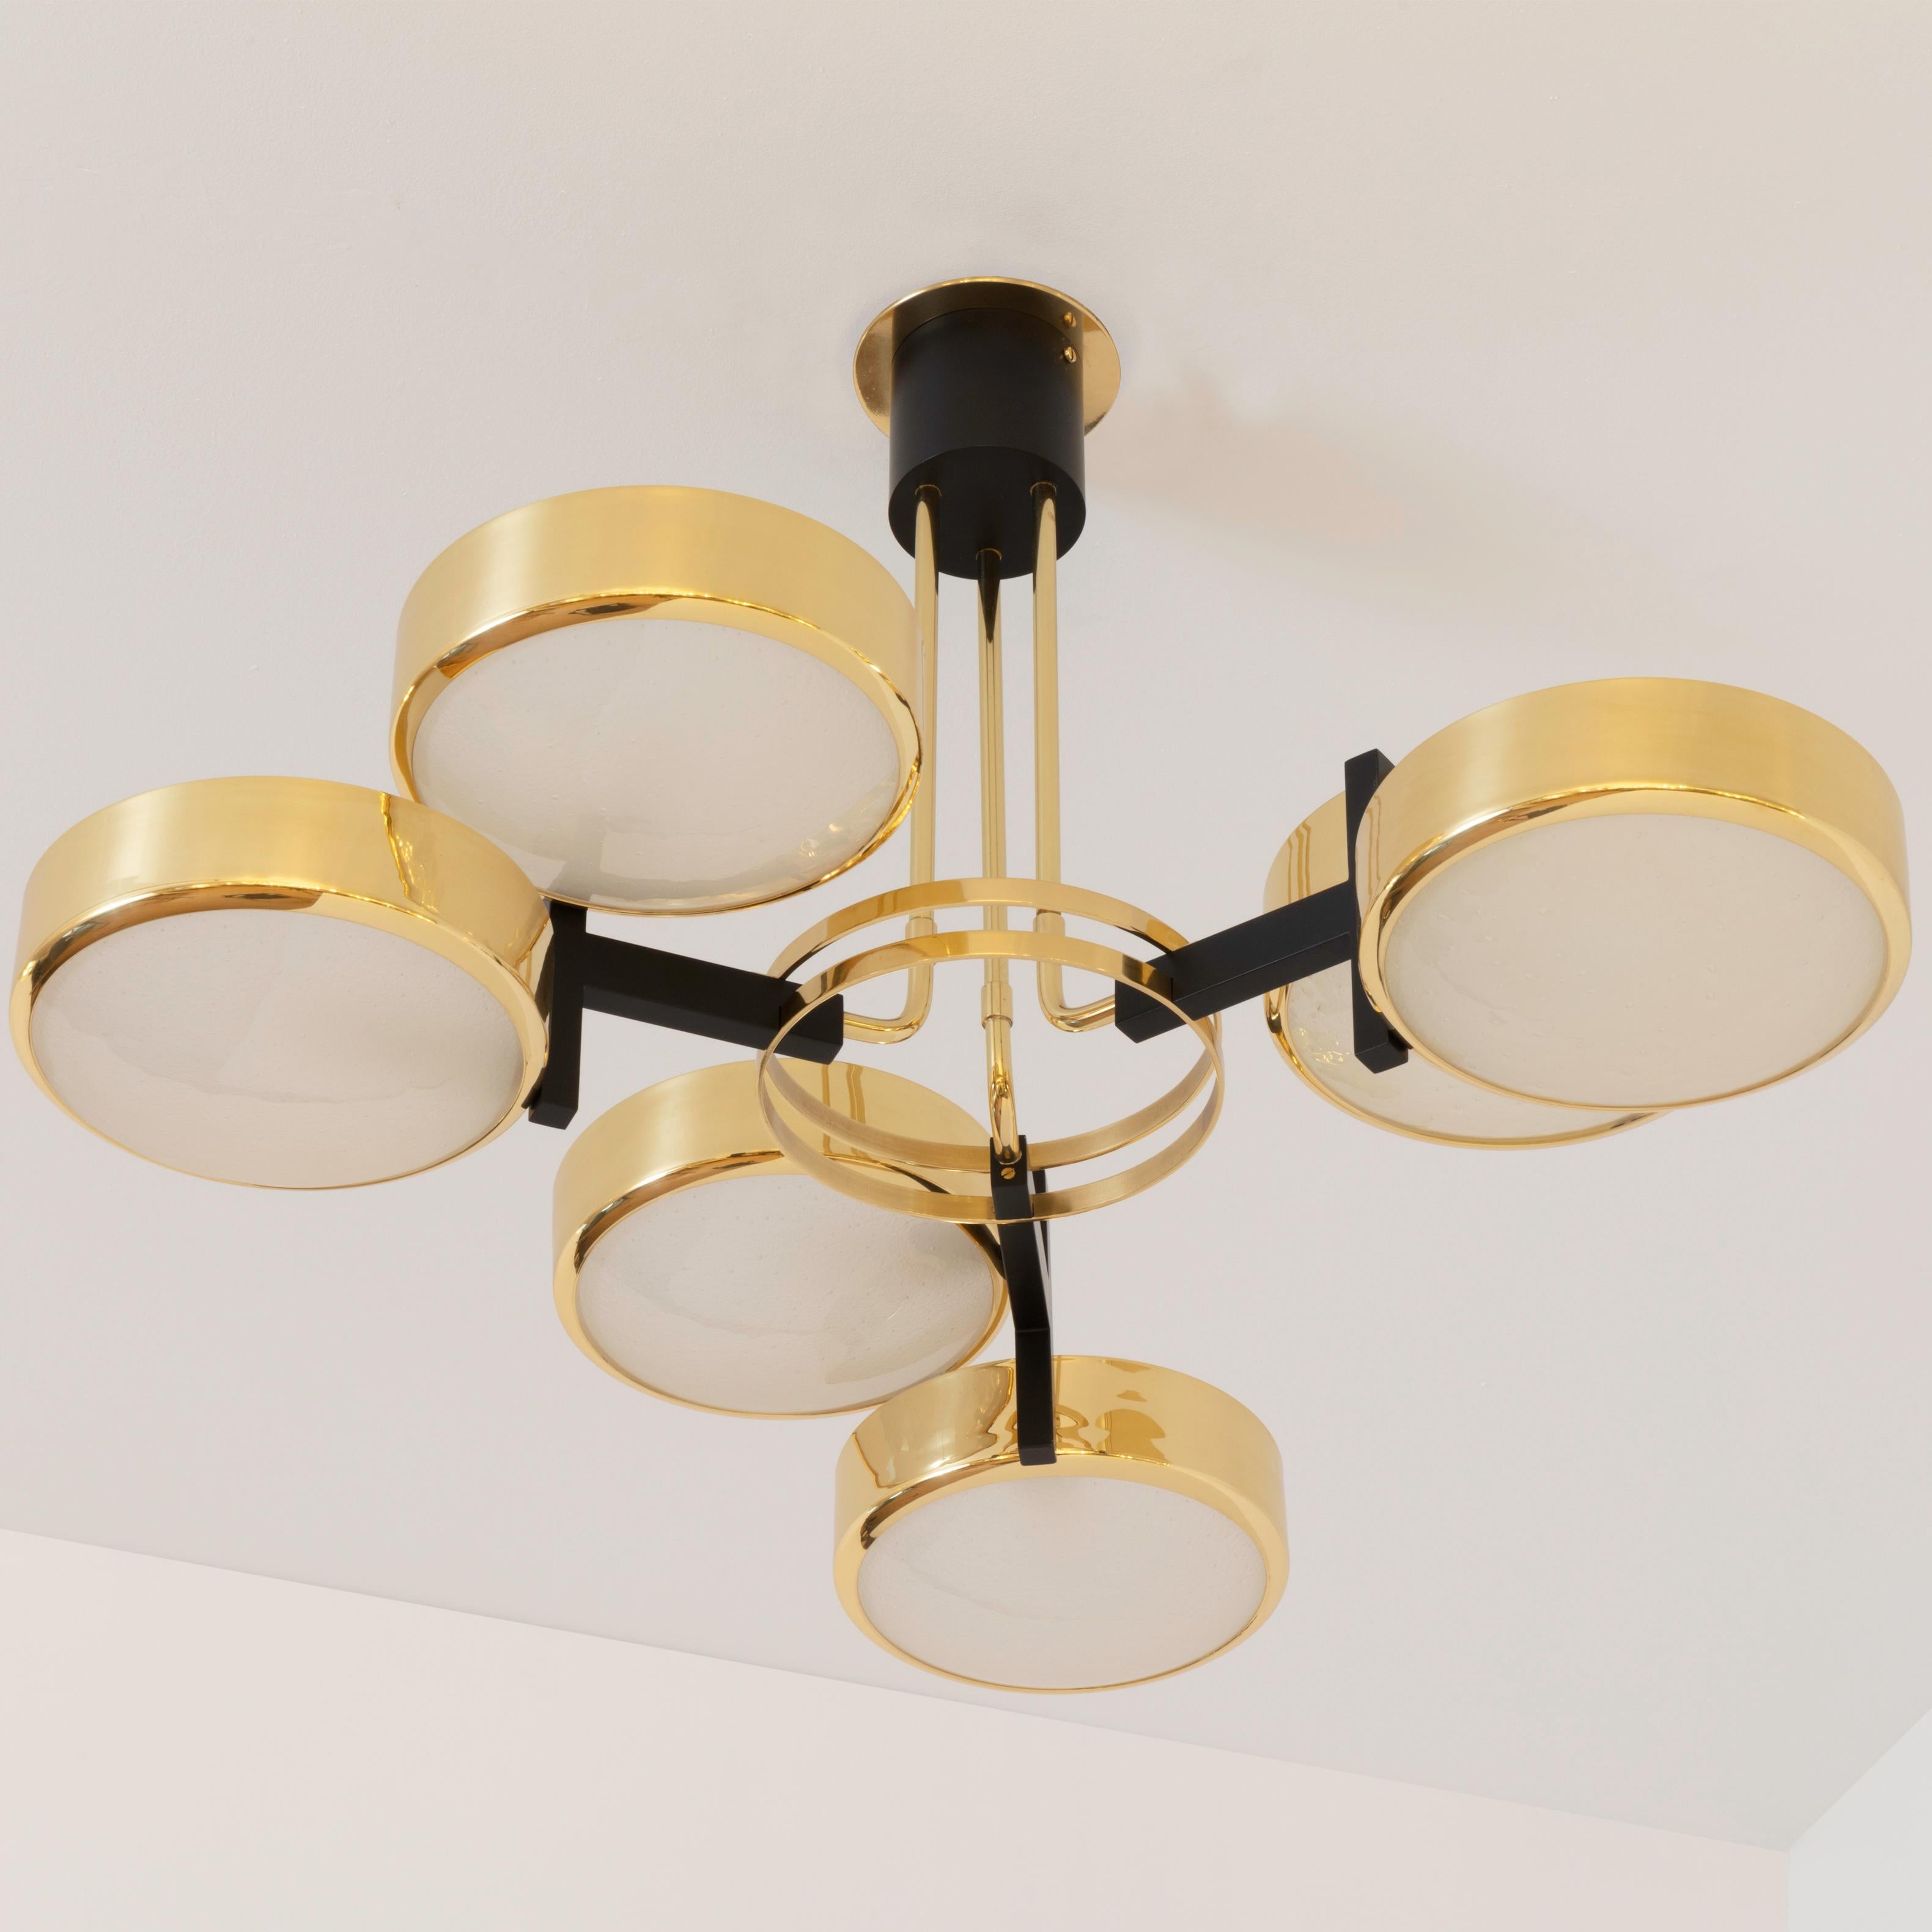 Italian Eclissi Ceiling Light by Gaspare Asaro-Bronze and Black Finish For Sale